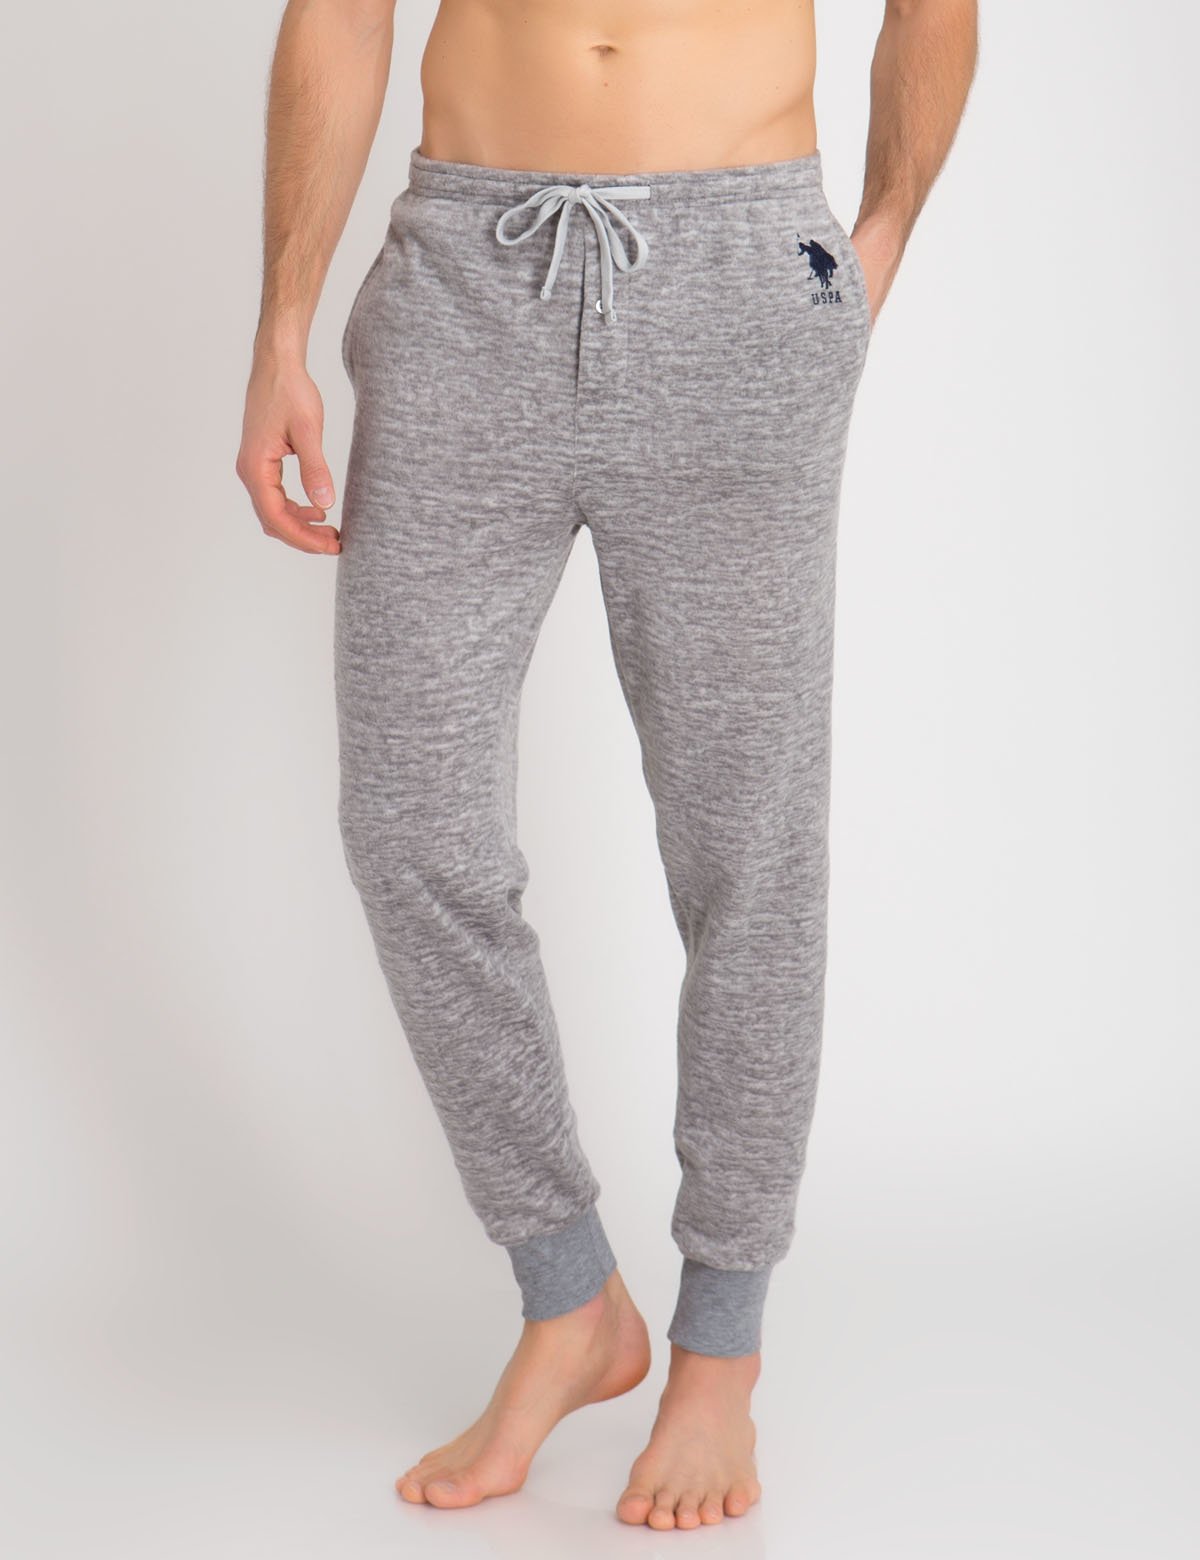 jogger pants with polo